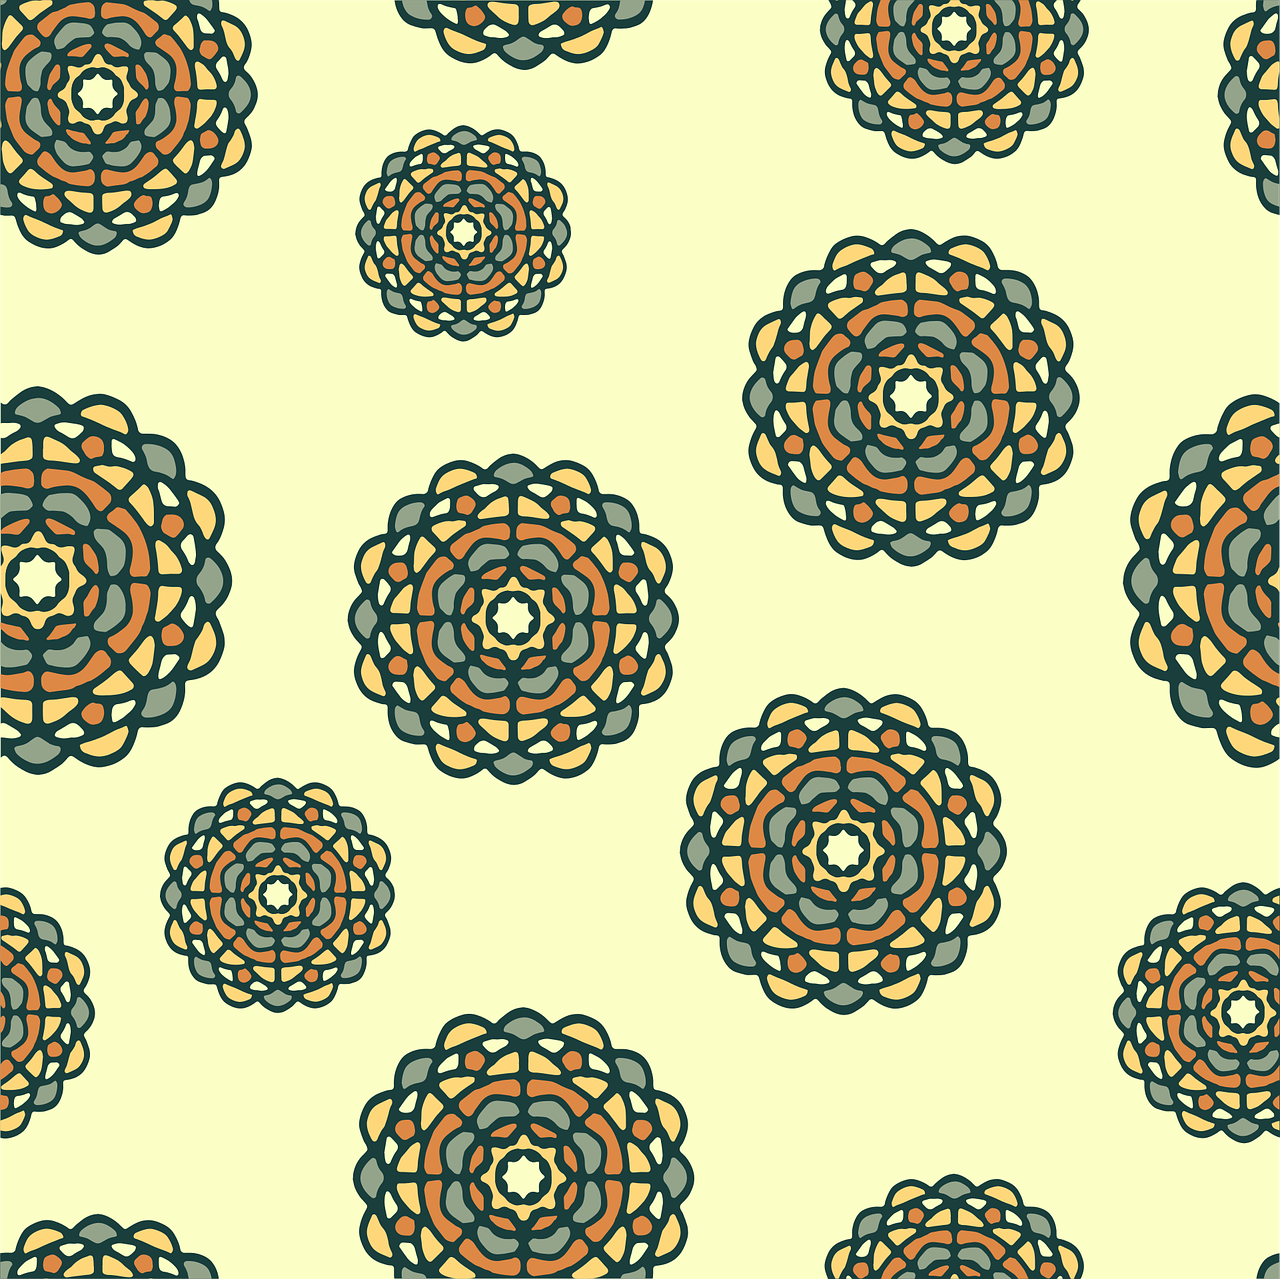 a pattern of flowers on a yellow background, art nouveau, smooth round shapes, celtic symbols, stylized layered shapes, on a pale background